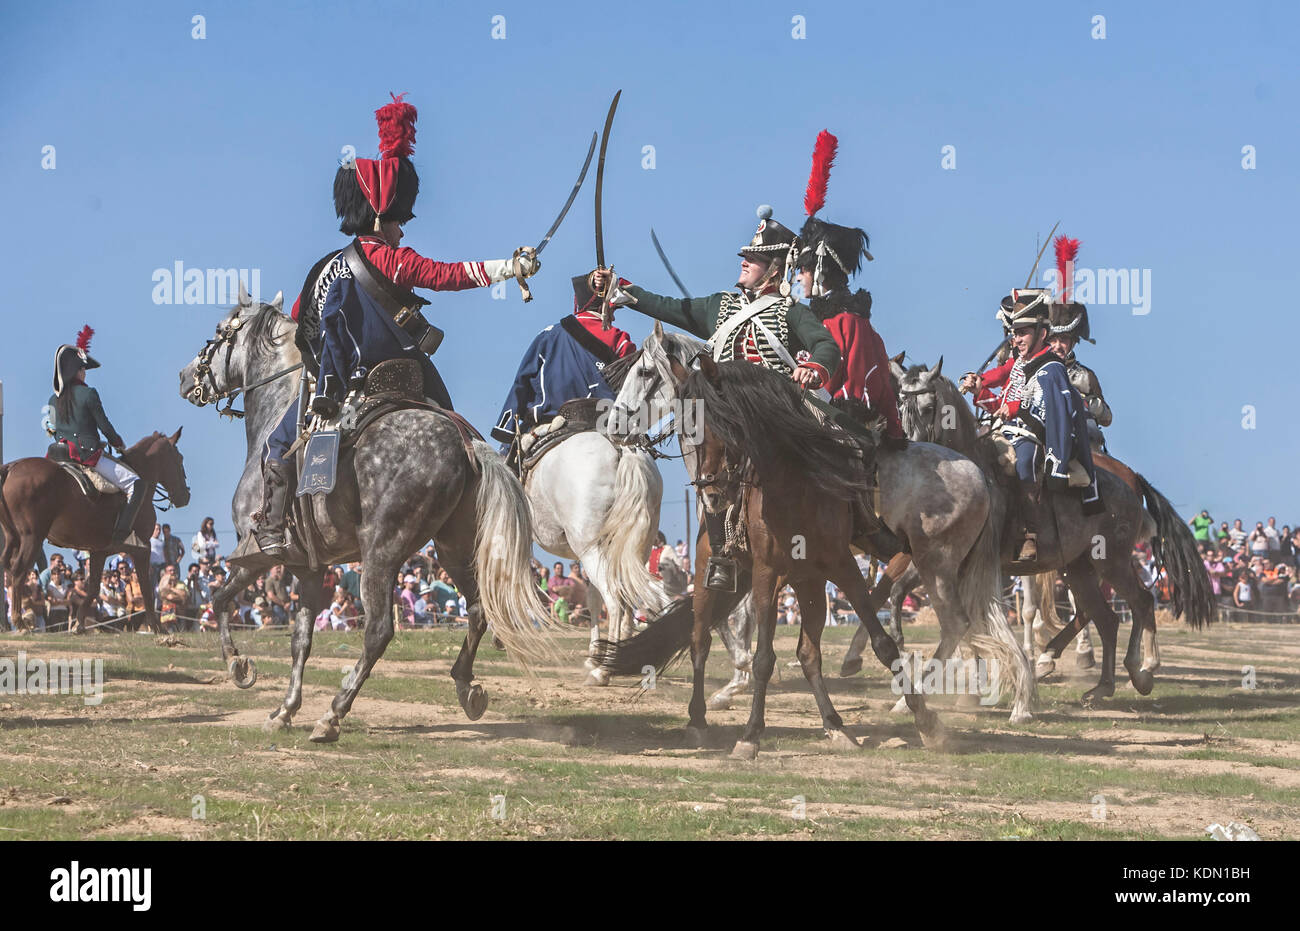 Bailen, Jaen province, SPAIN - 5 october 2008: French soldiers on horseback attacking enemy troops in the commemoration of the battle of Bailen, Jaen  Stock Photo